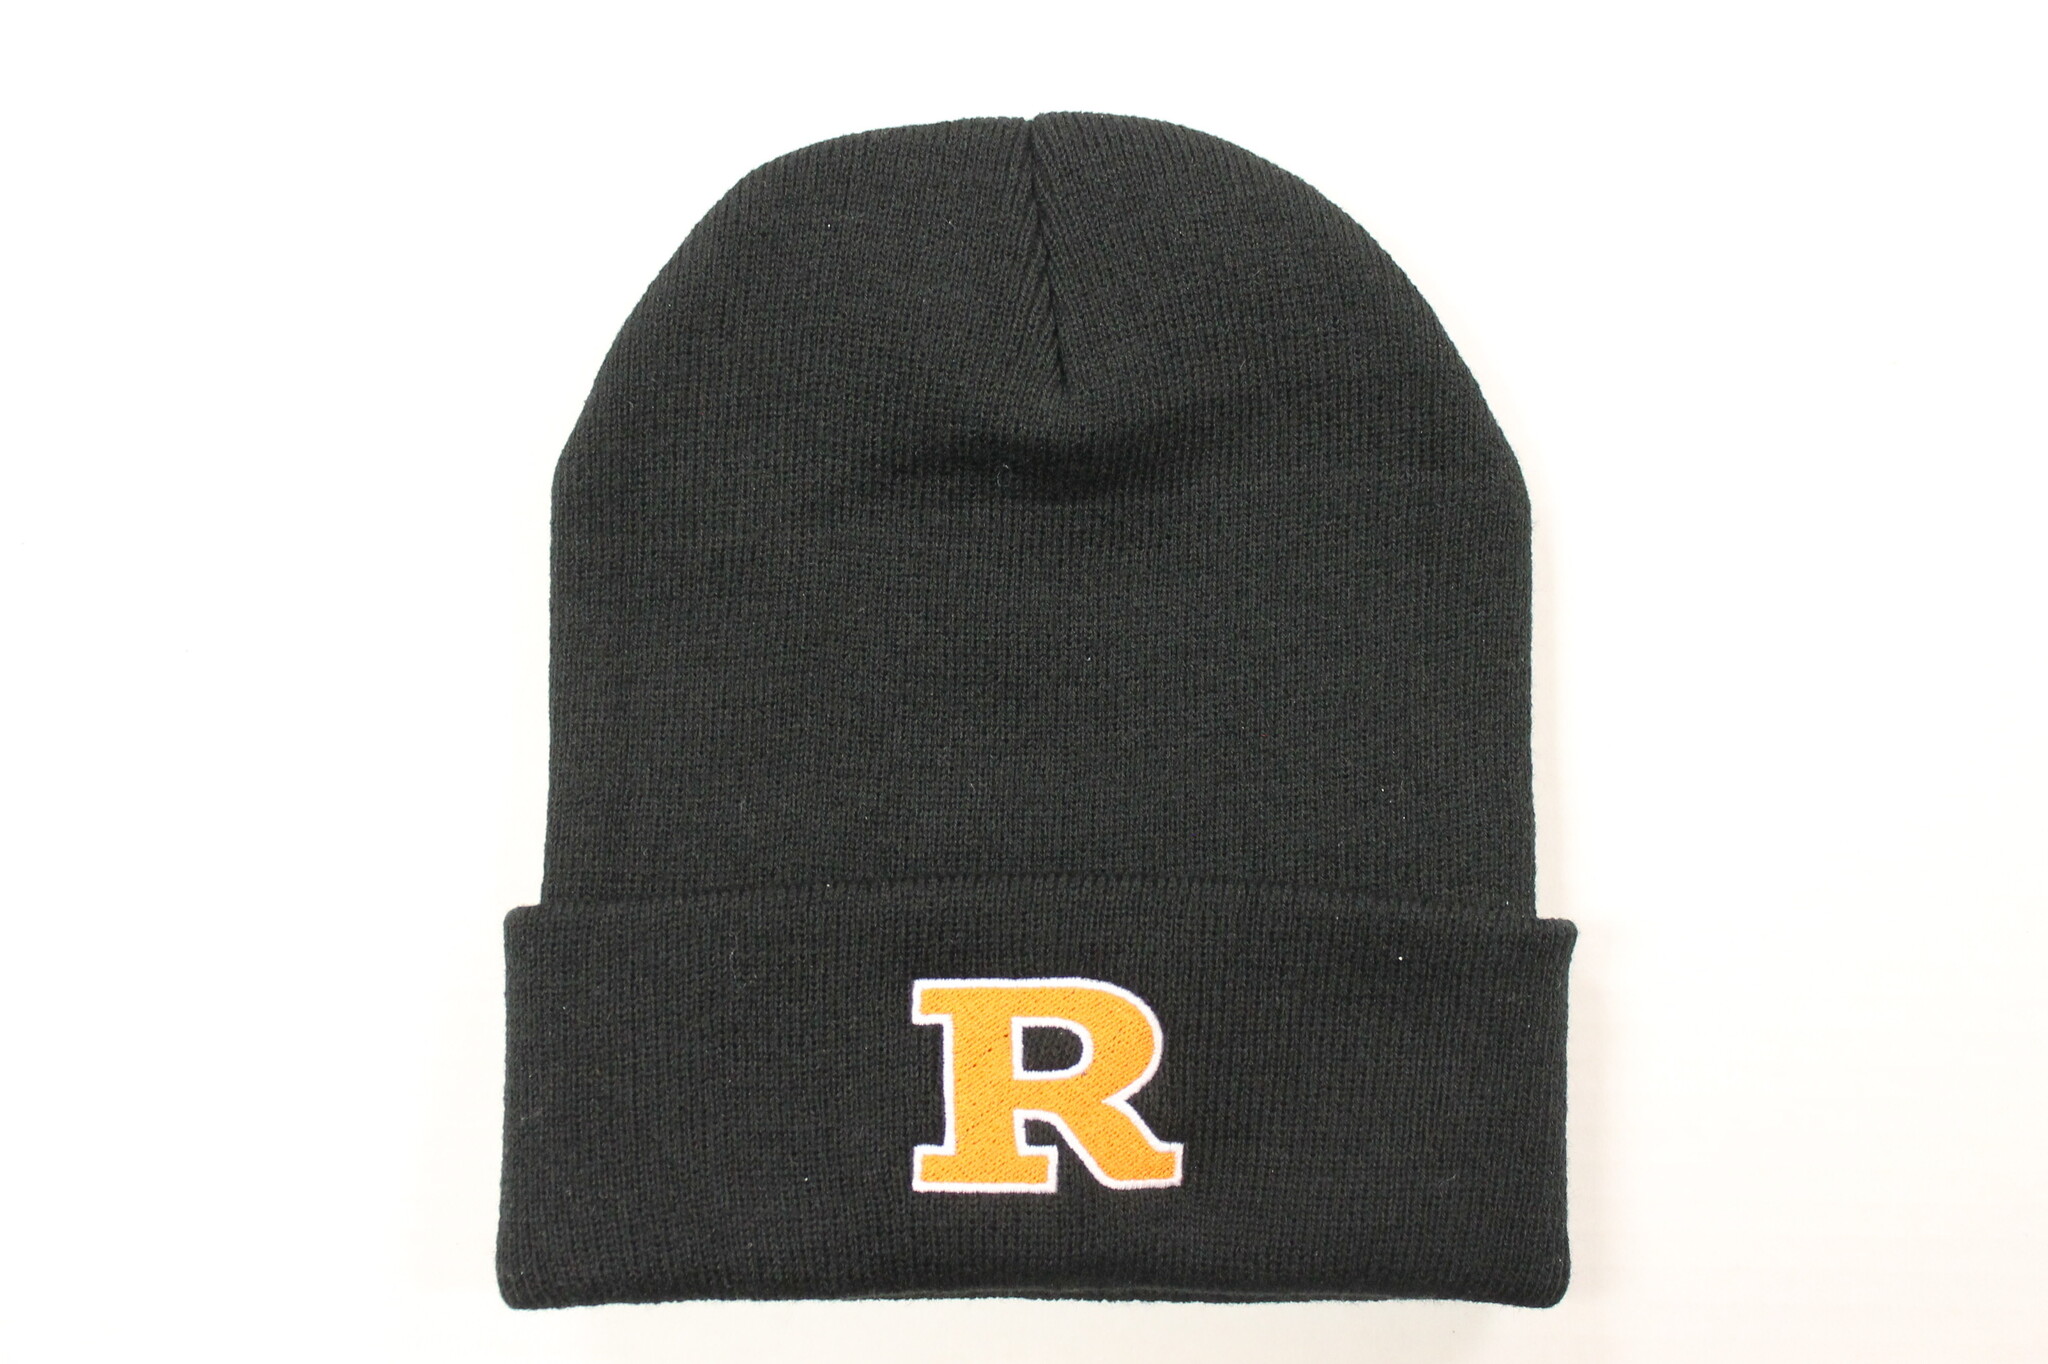 Black Beanie - Embroidered "R" (Adult Sizing)